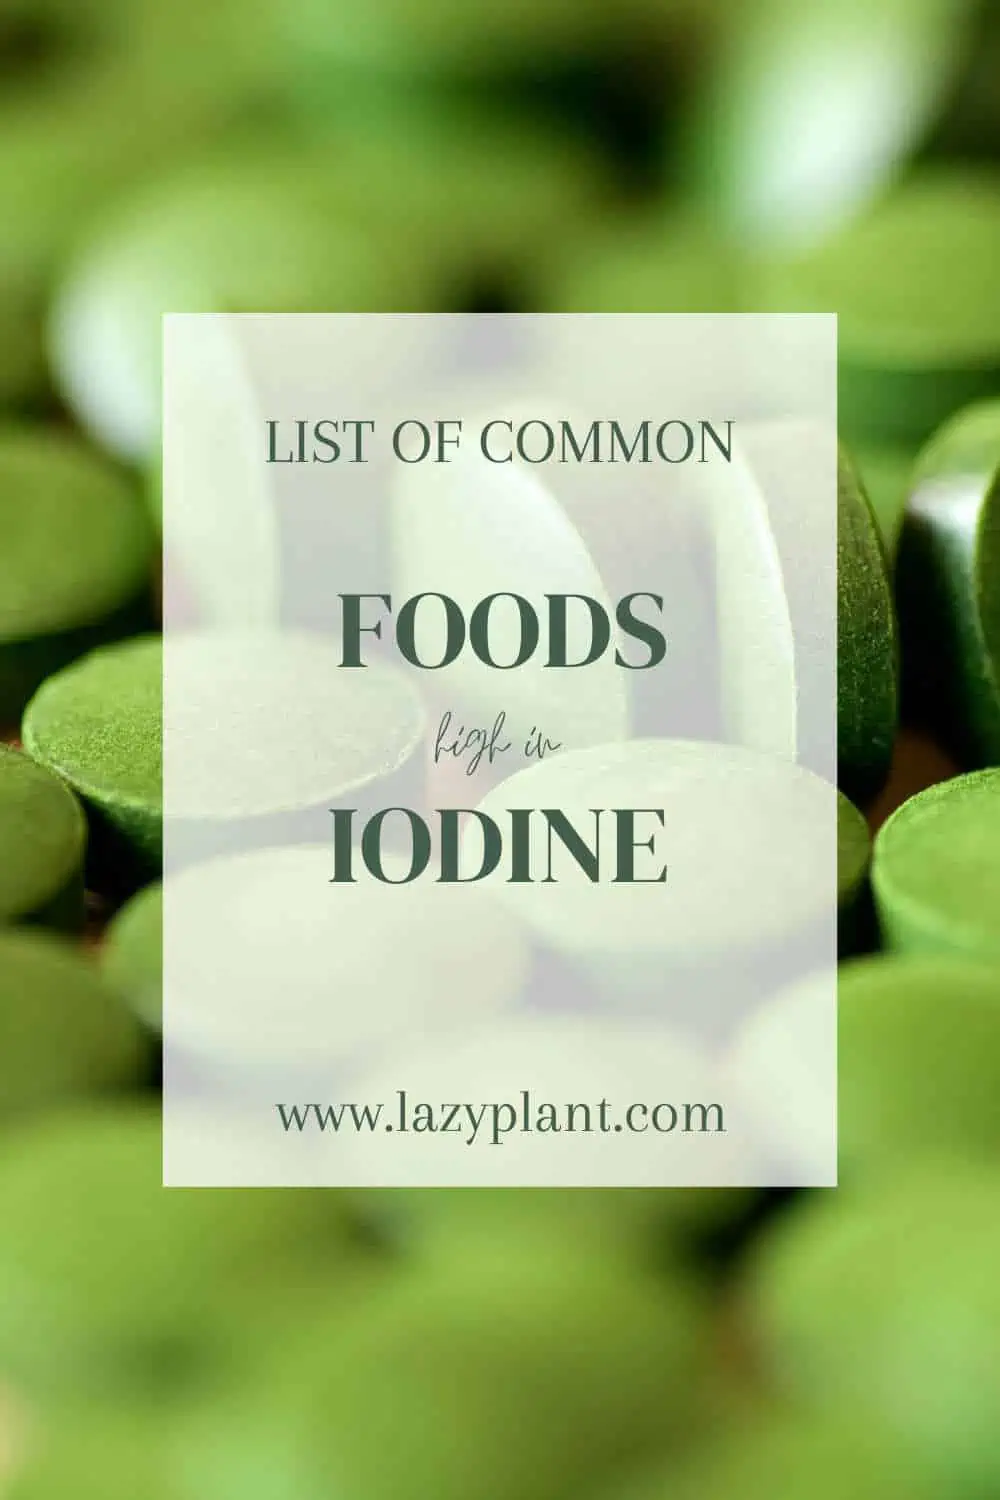 A list of the richest foods in iodine!